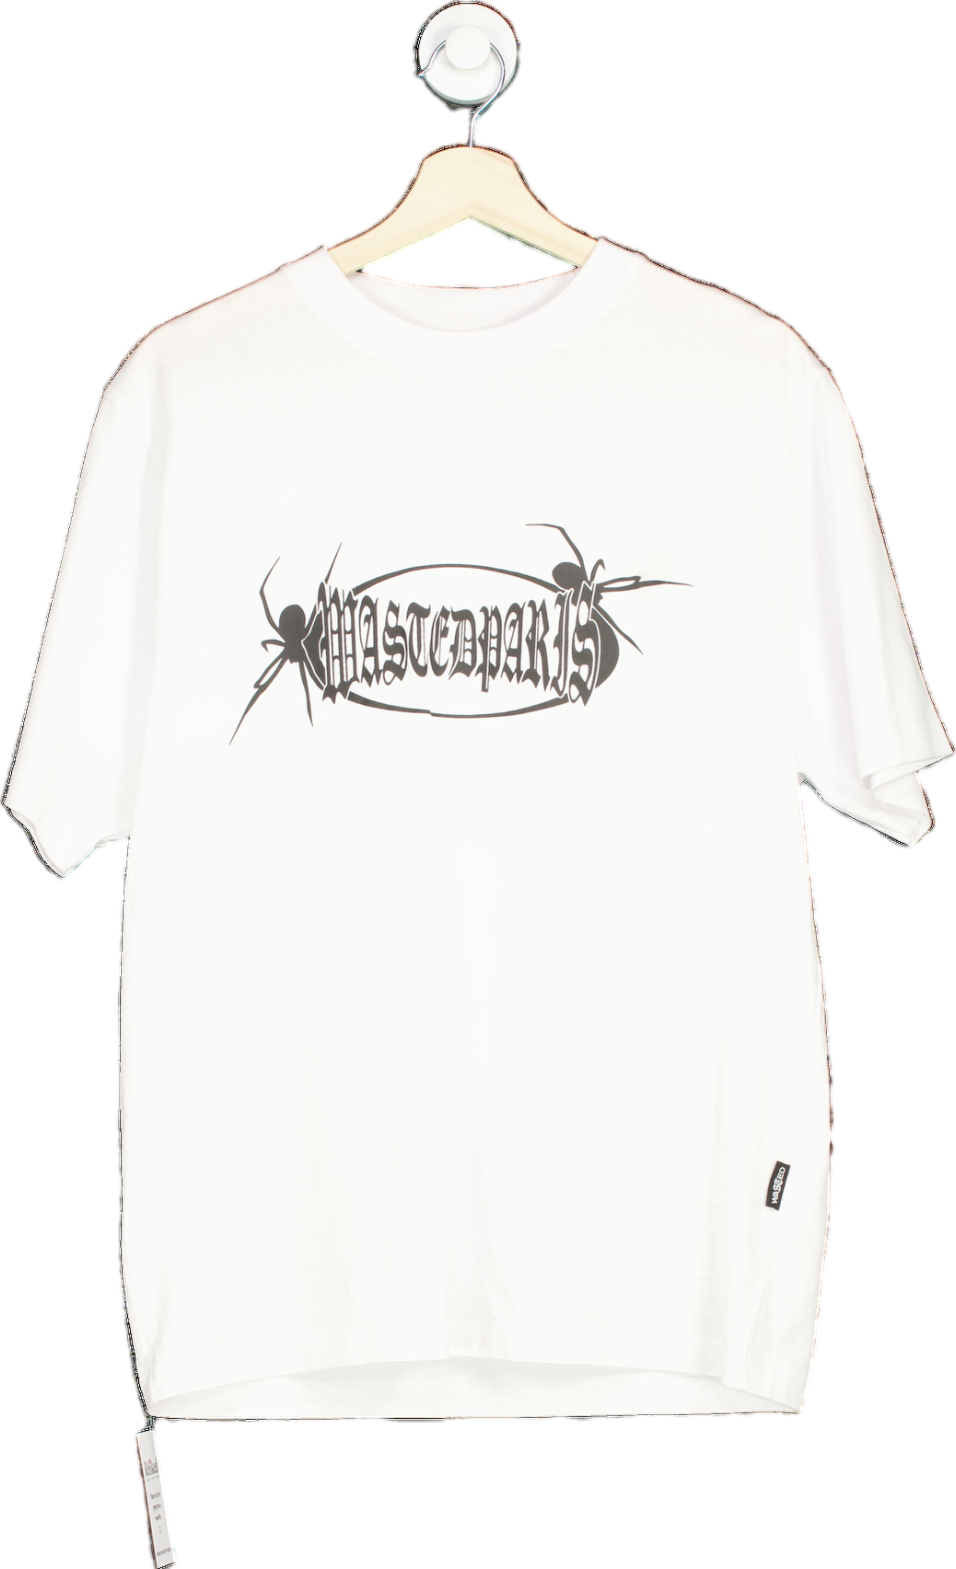 Wasted White Boiler T-Shirt Small